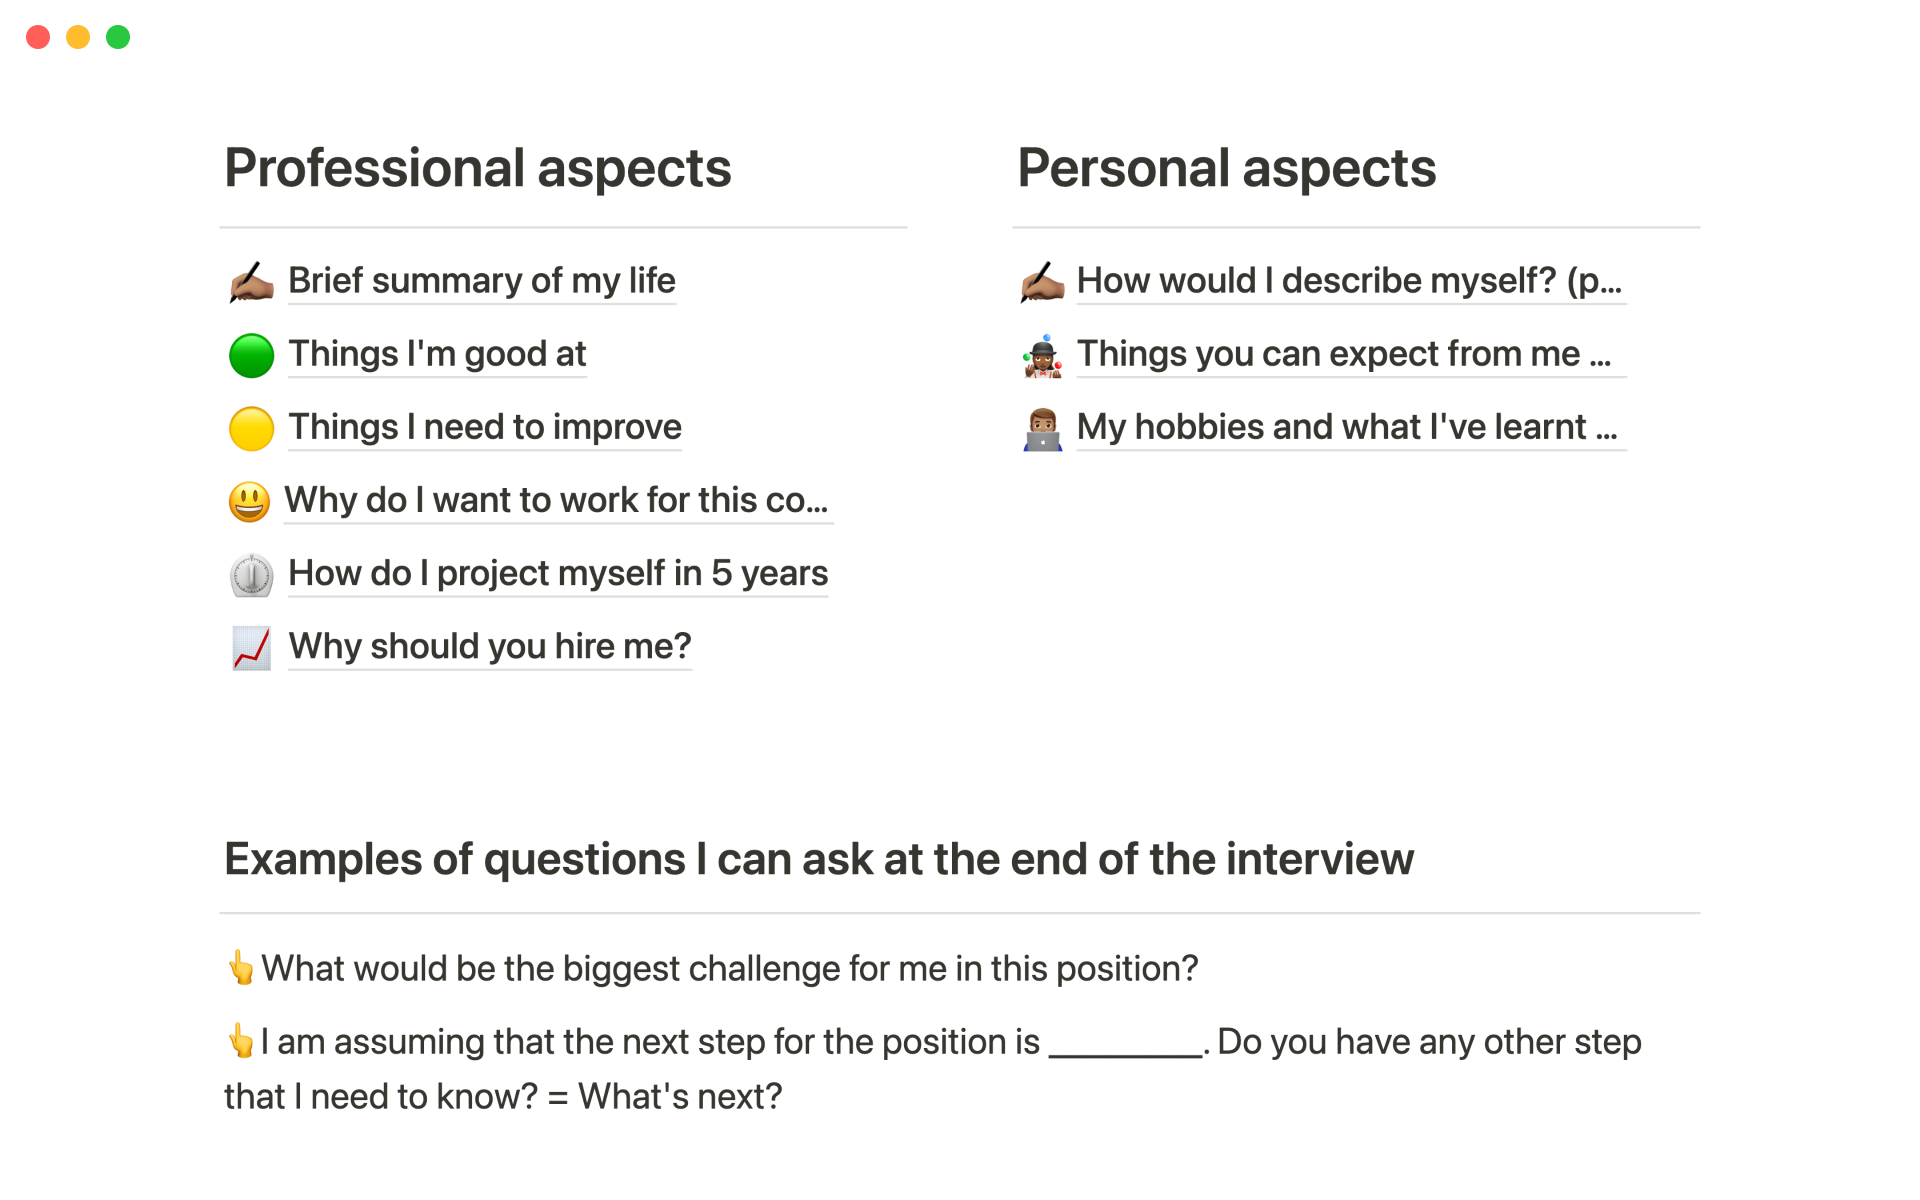 Helps people prepare for their next job interview.